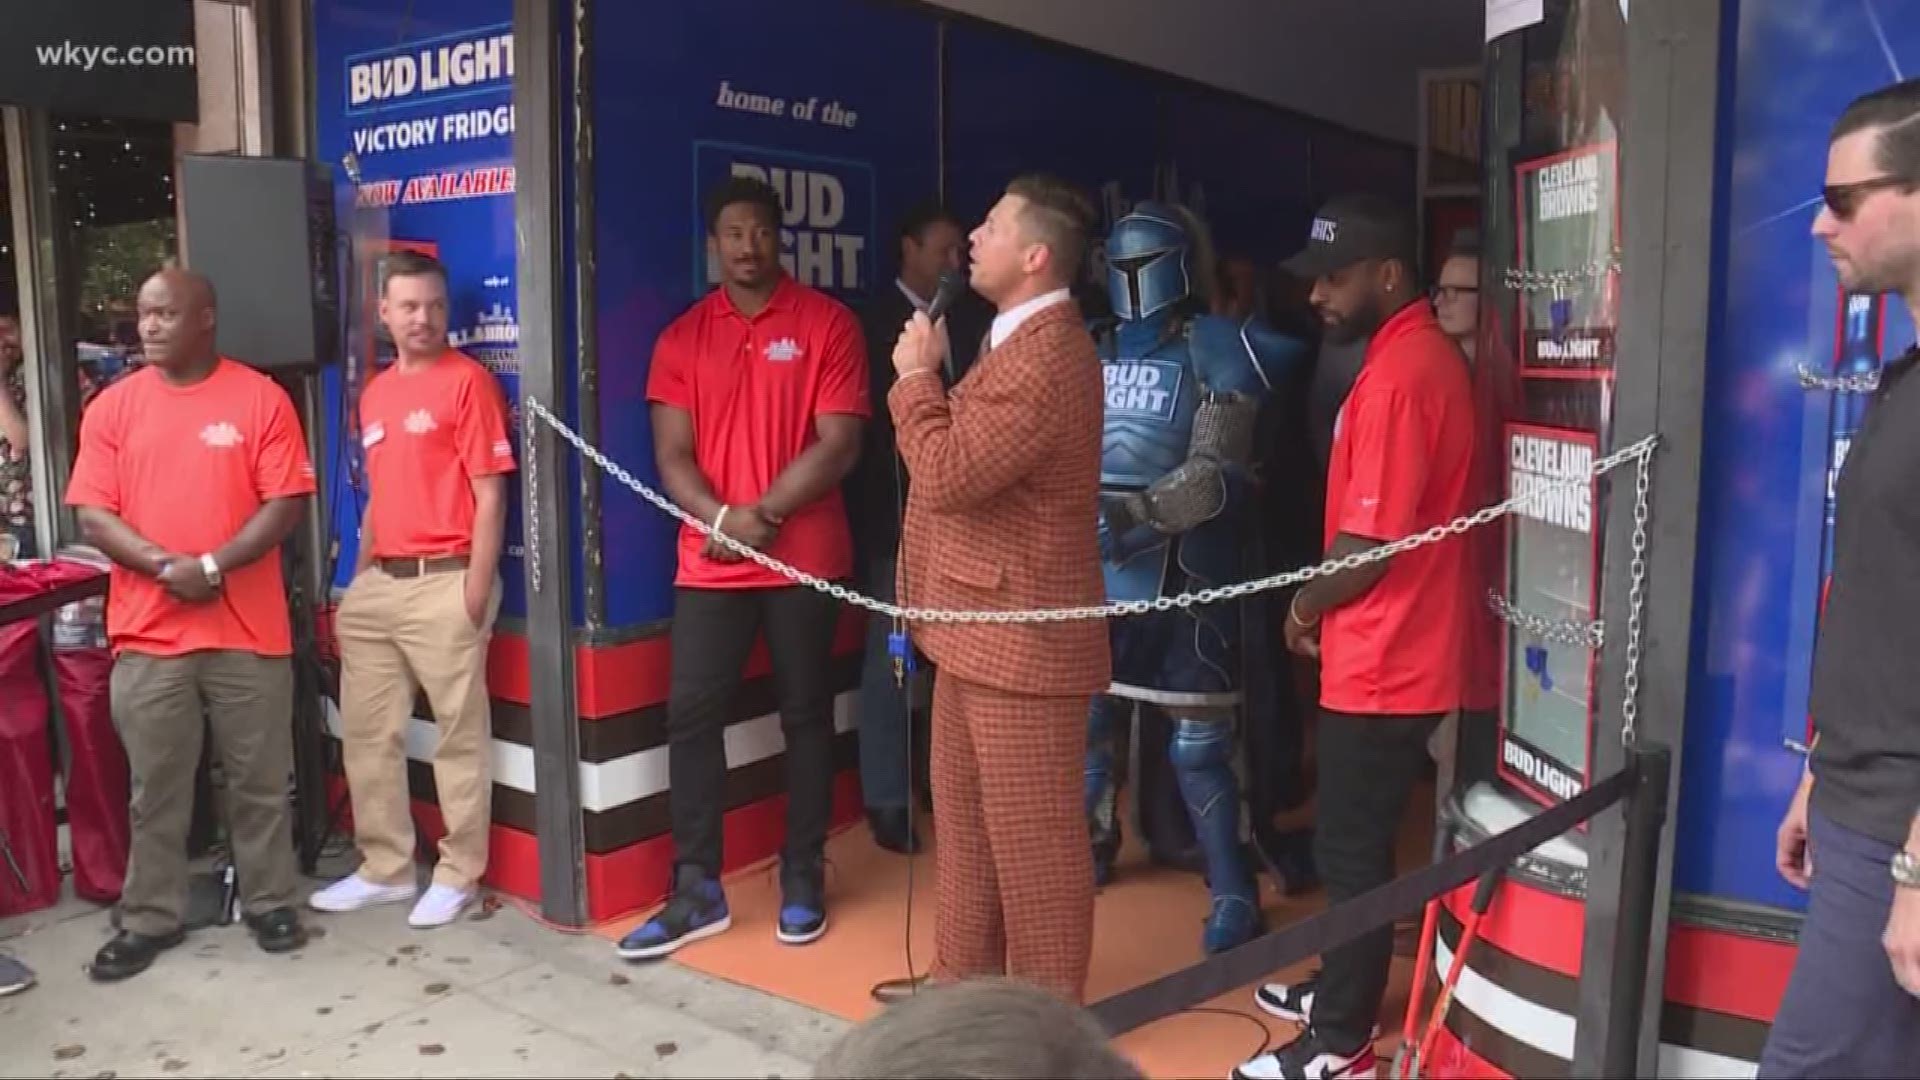 Bud Light to sell Cleveland Browns Victory Fridges at pop-up shop